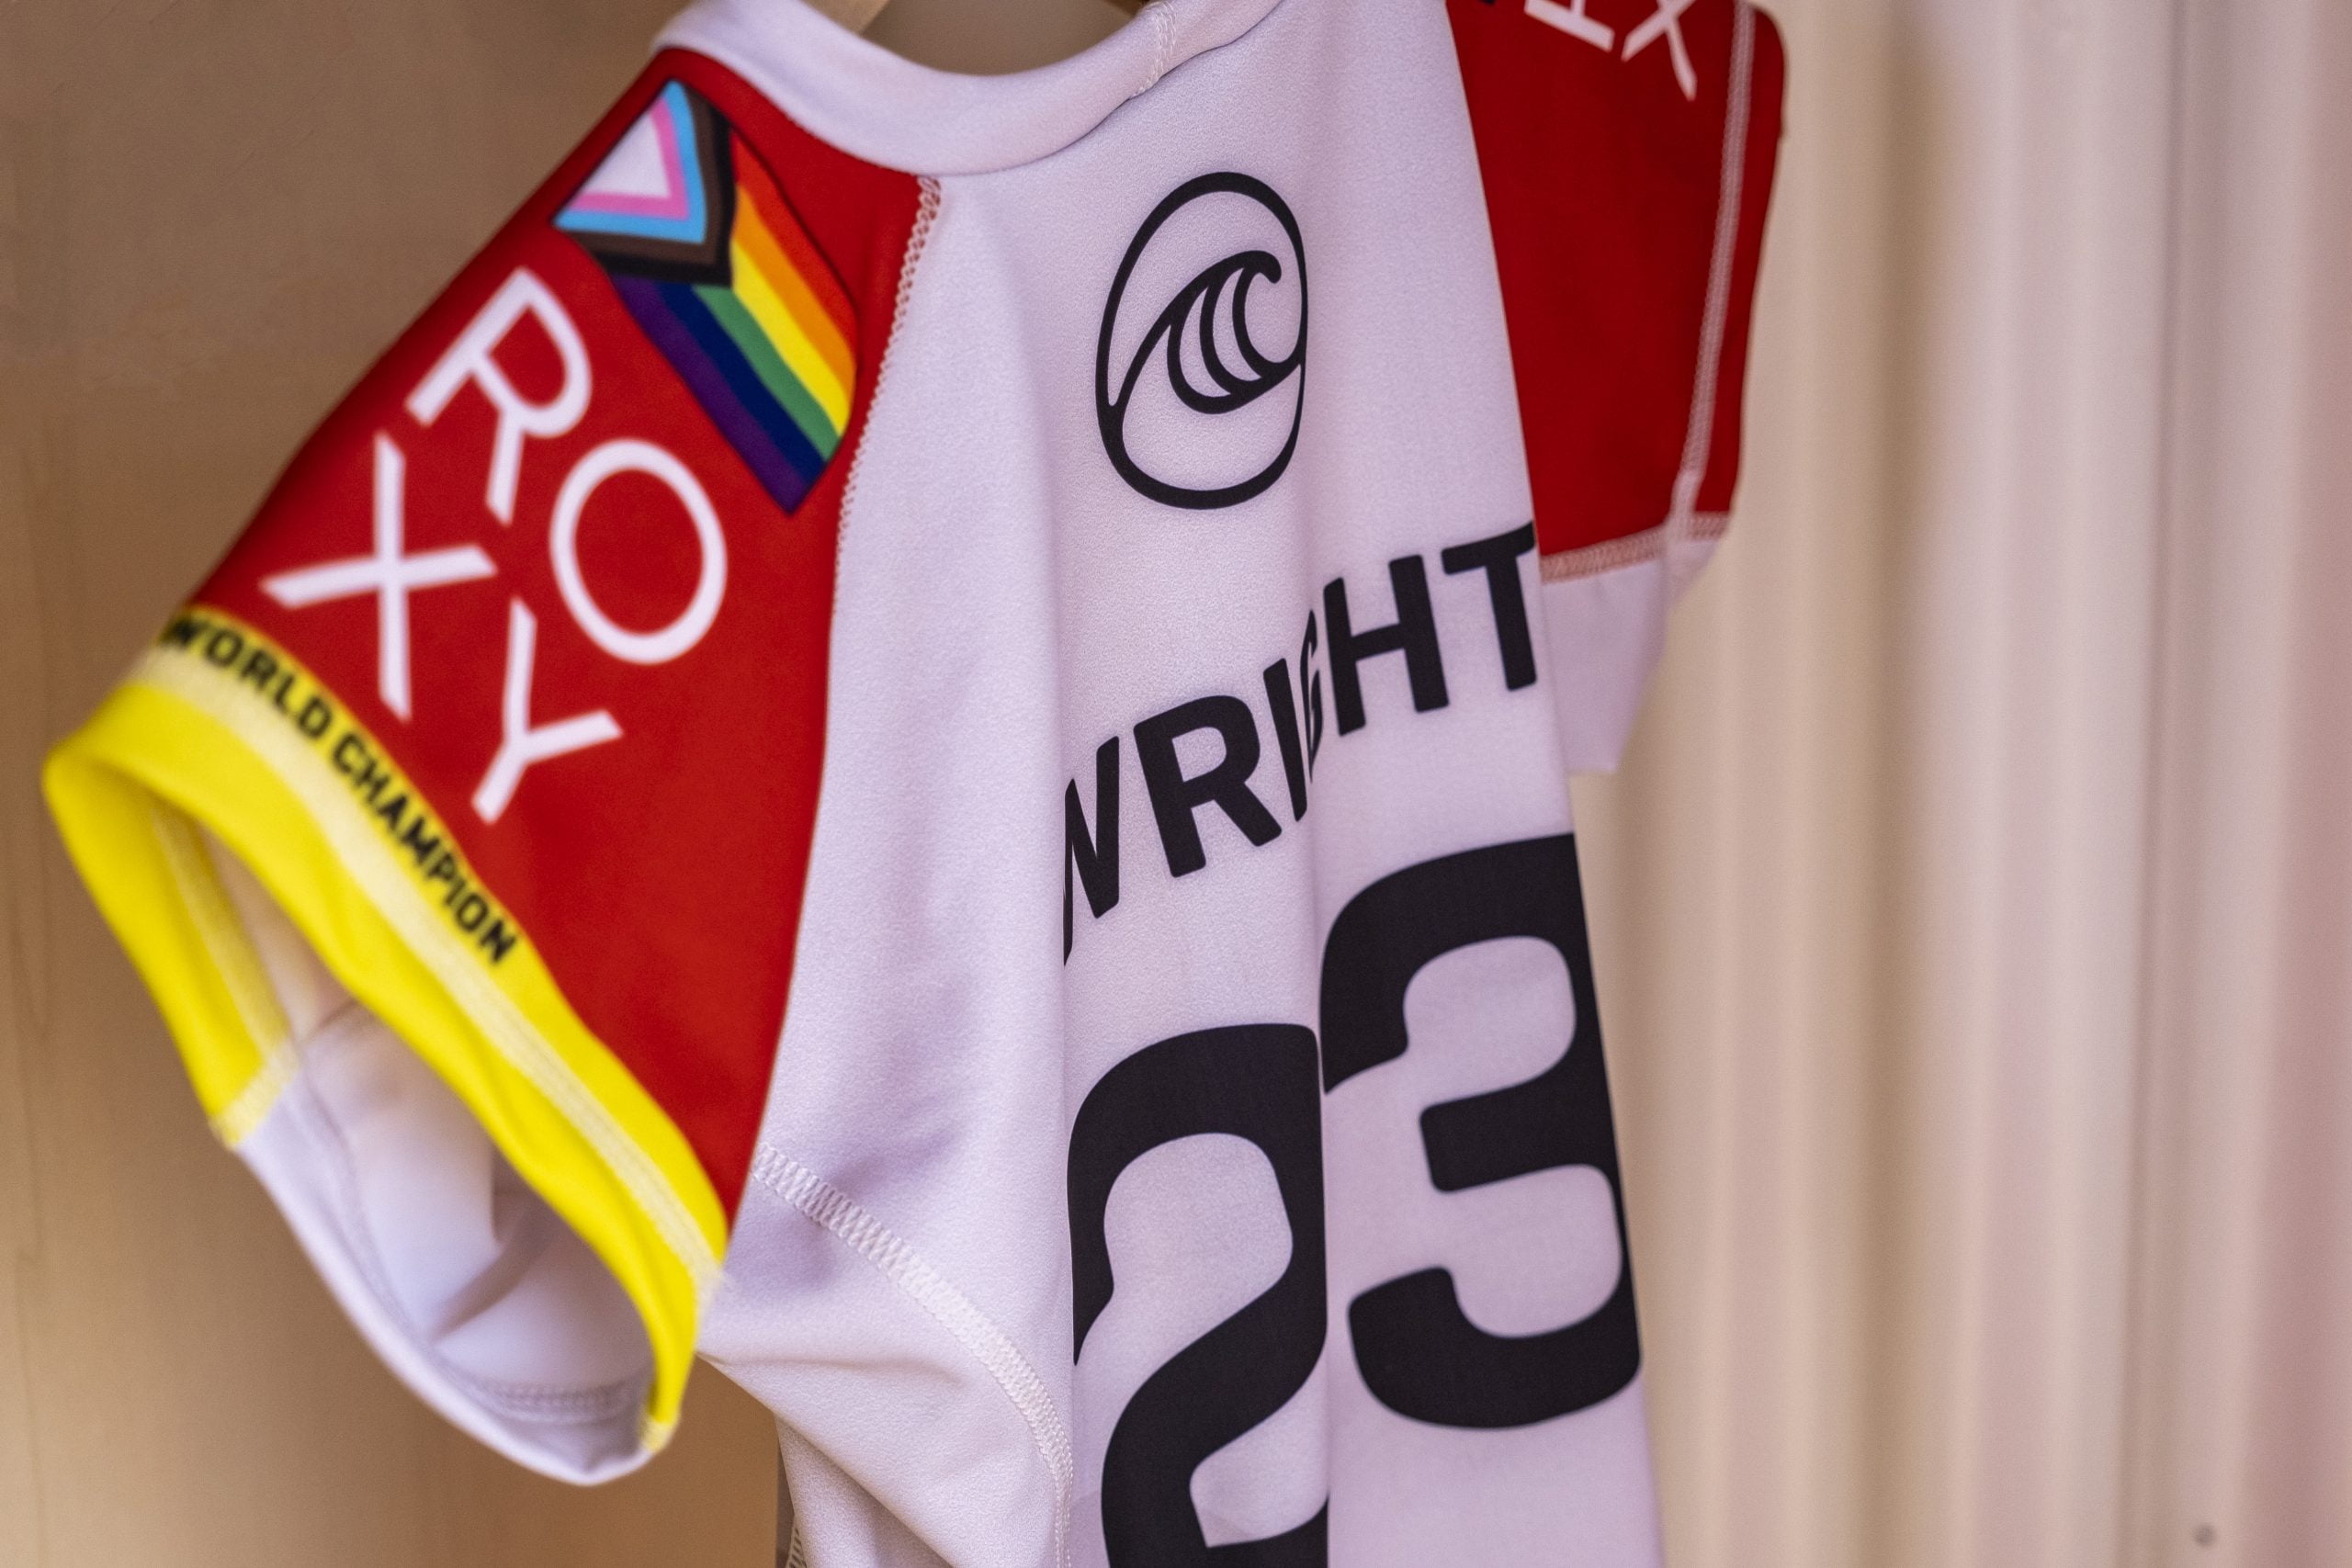 KAPALUA, HI - DECEMBER 4: Two-time WSL Champion Tyler Wright of Australia is presented with a custom jersey for competition at the Maui Pro presented by ROXY on December 4, 2020 in Kapalua, Hawaii. (Photo by Keoki Saguibo/World Surf League via Getty Images)